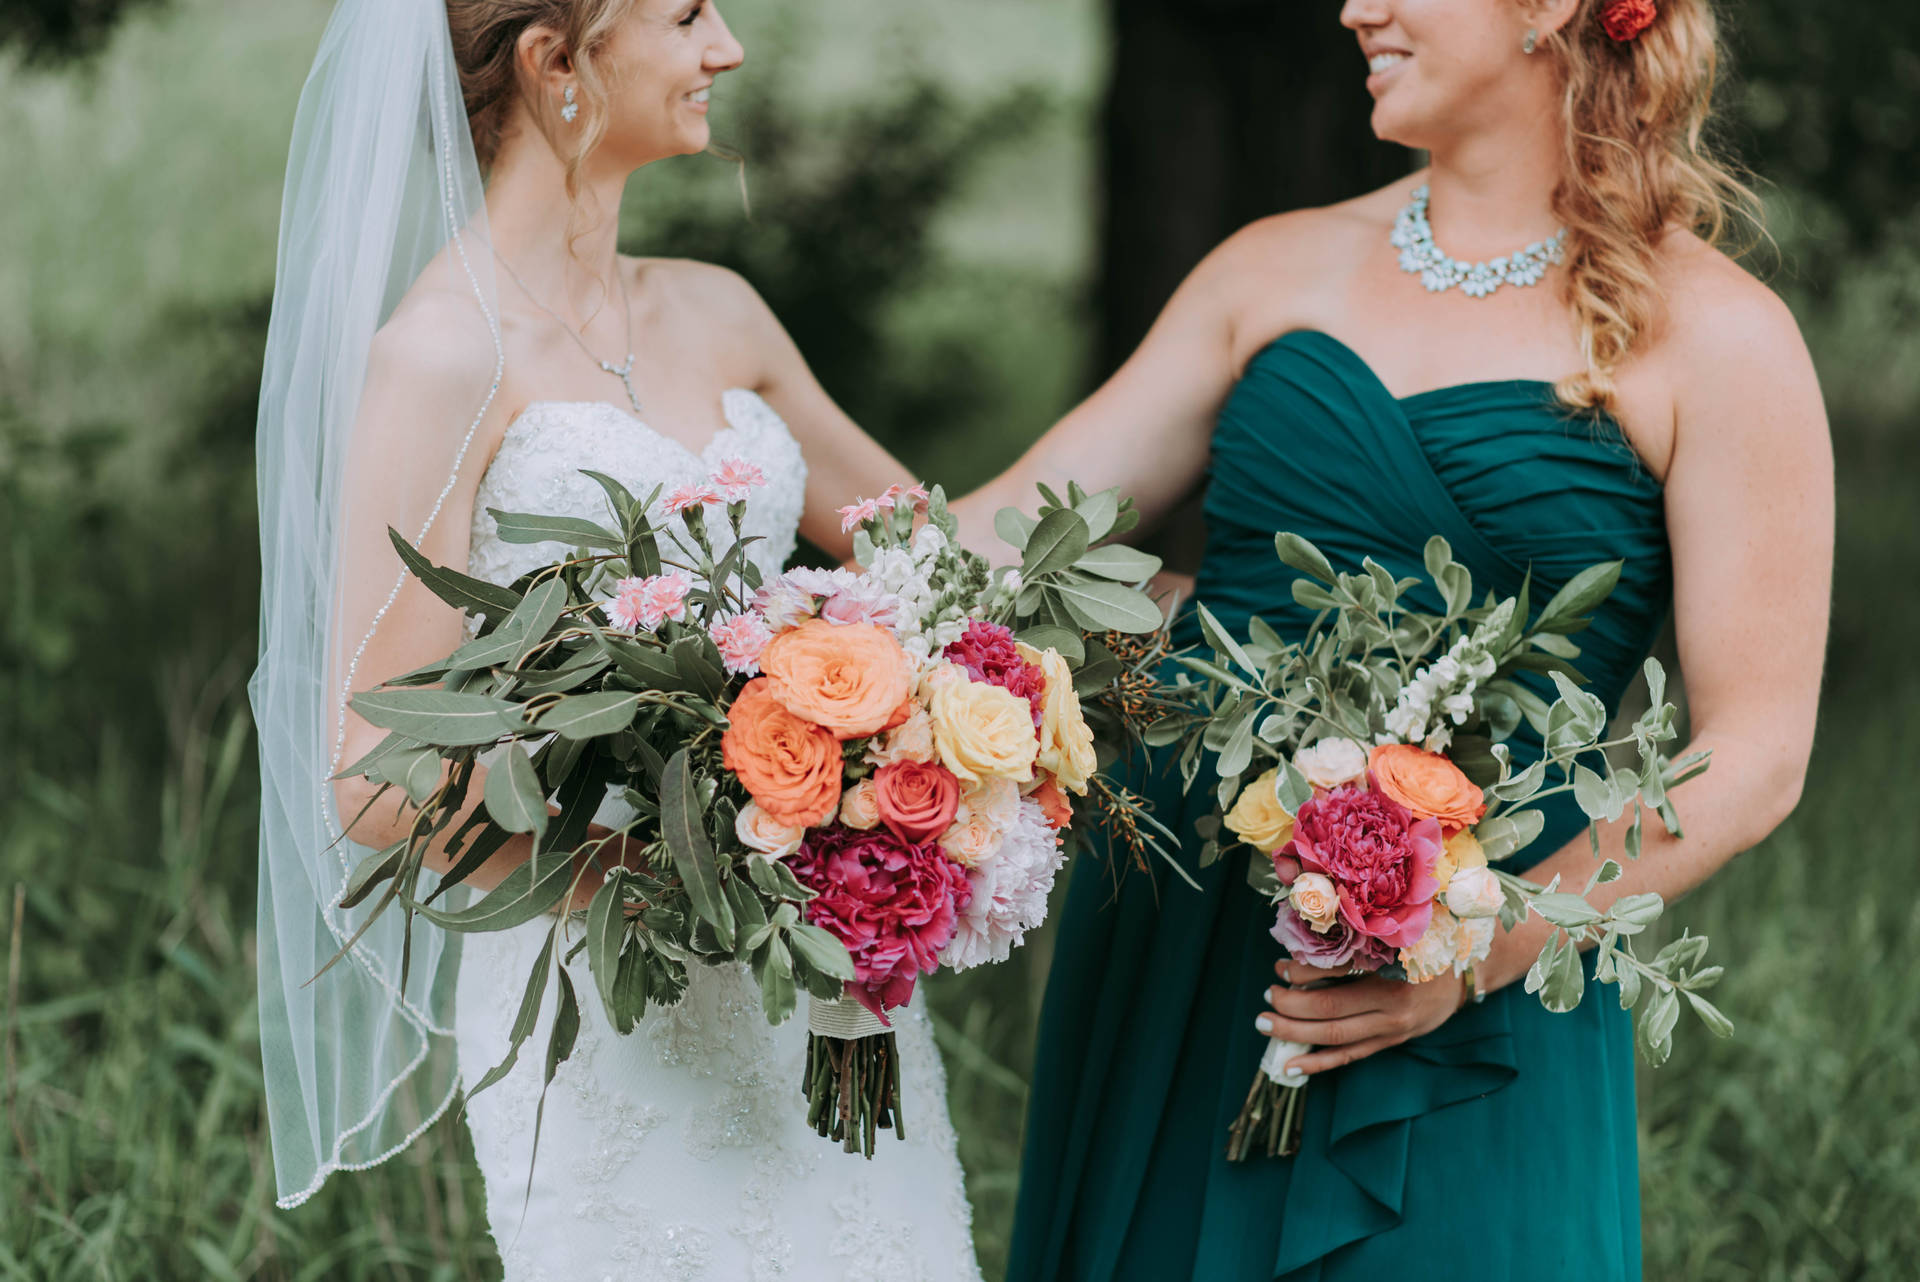 Bride And Bridesmaid With Flowers